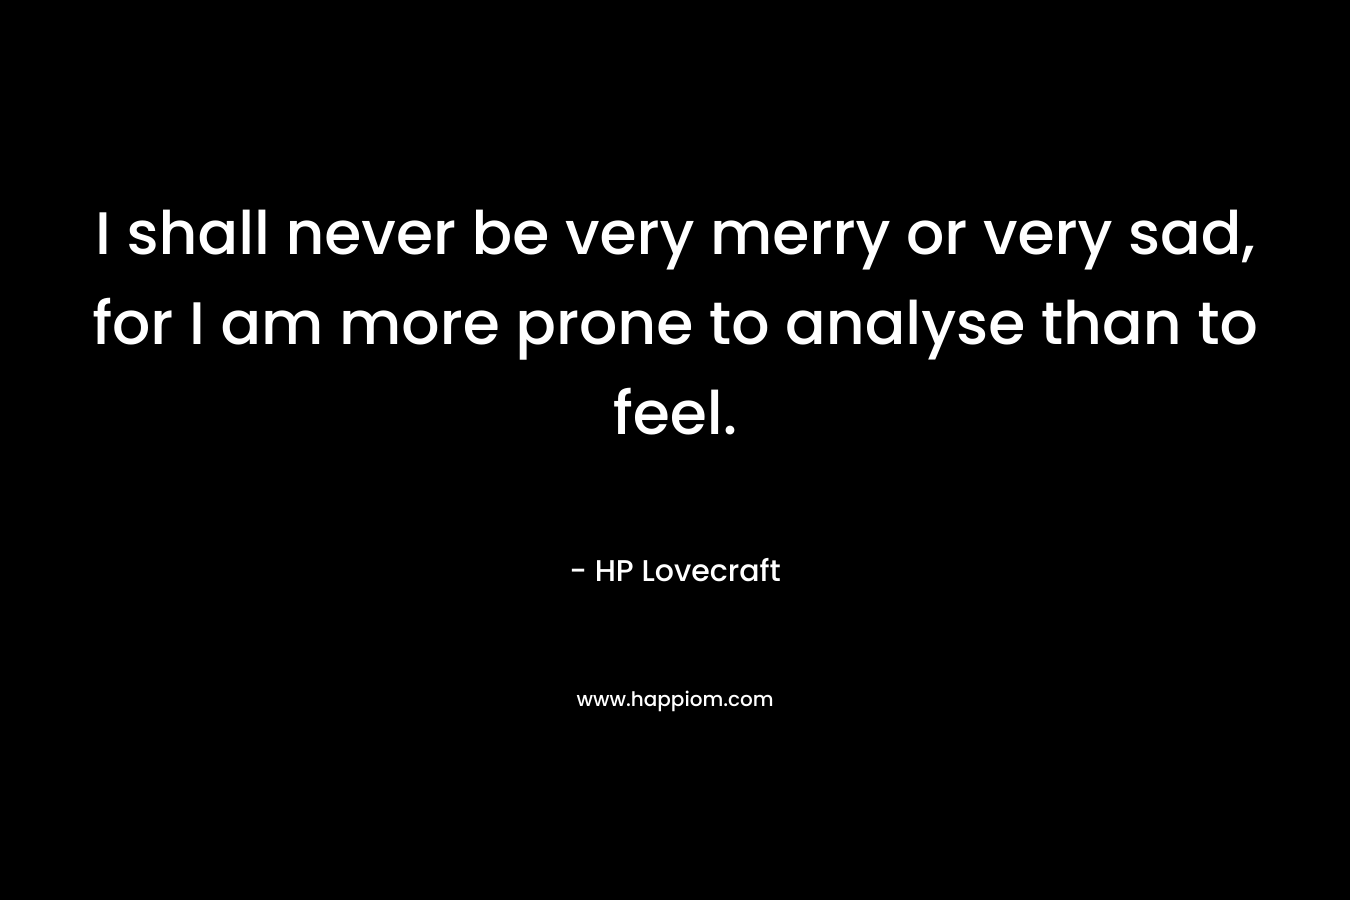 I shall never be very merry or very sad, for I am more prone to analyse than to feel.